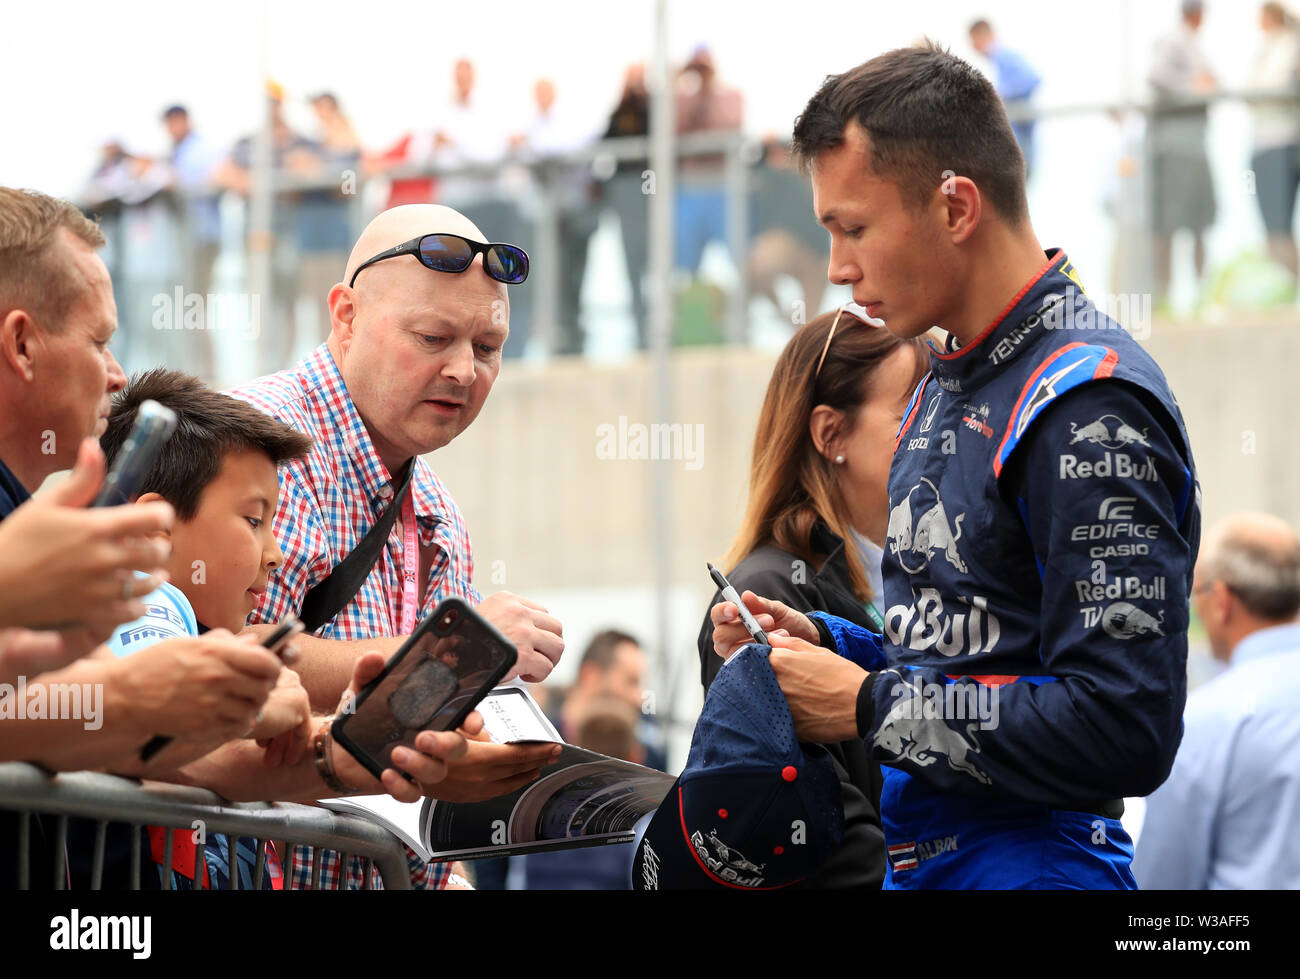 Torro Rosso river Alexander Albon after qualifying for the British Grand Prix at Silverstone, Towcester. Stock Photo